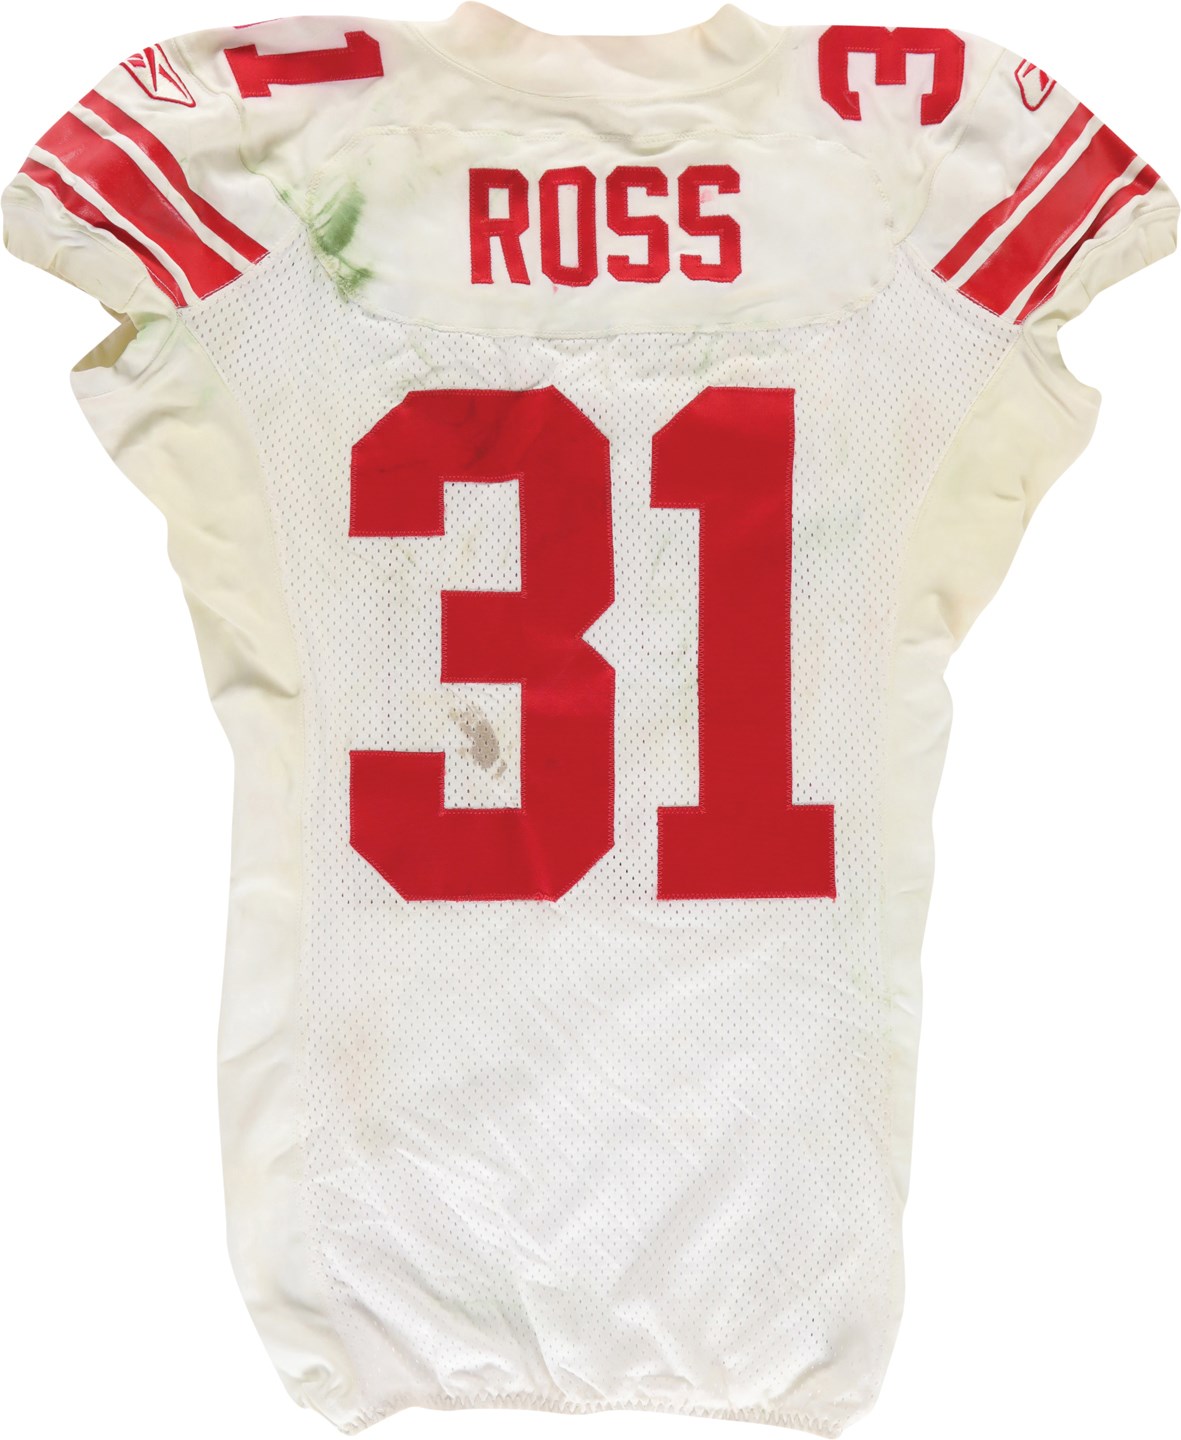 Football - 2008 Aaron Ross Super Bowl XLII New York Giants Game Worn Jersey (Photo-Matched)